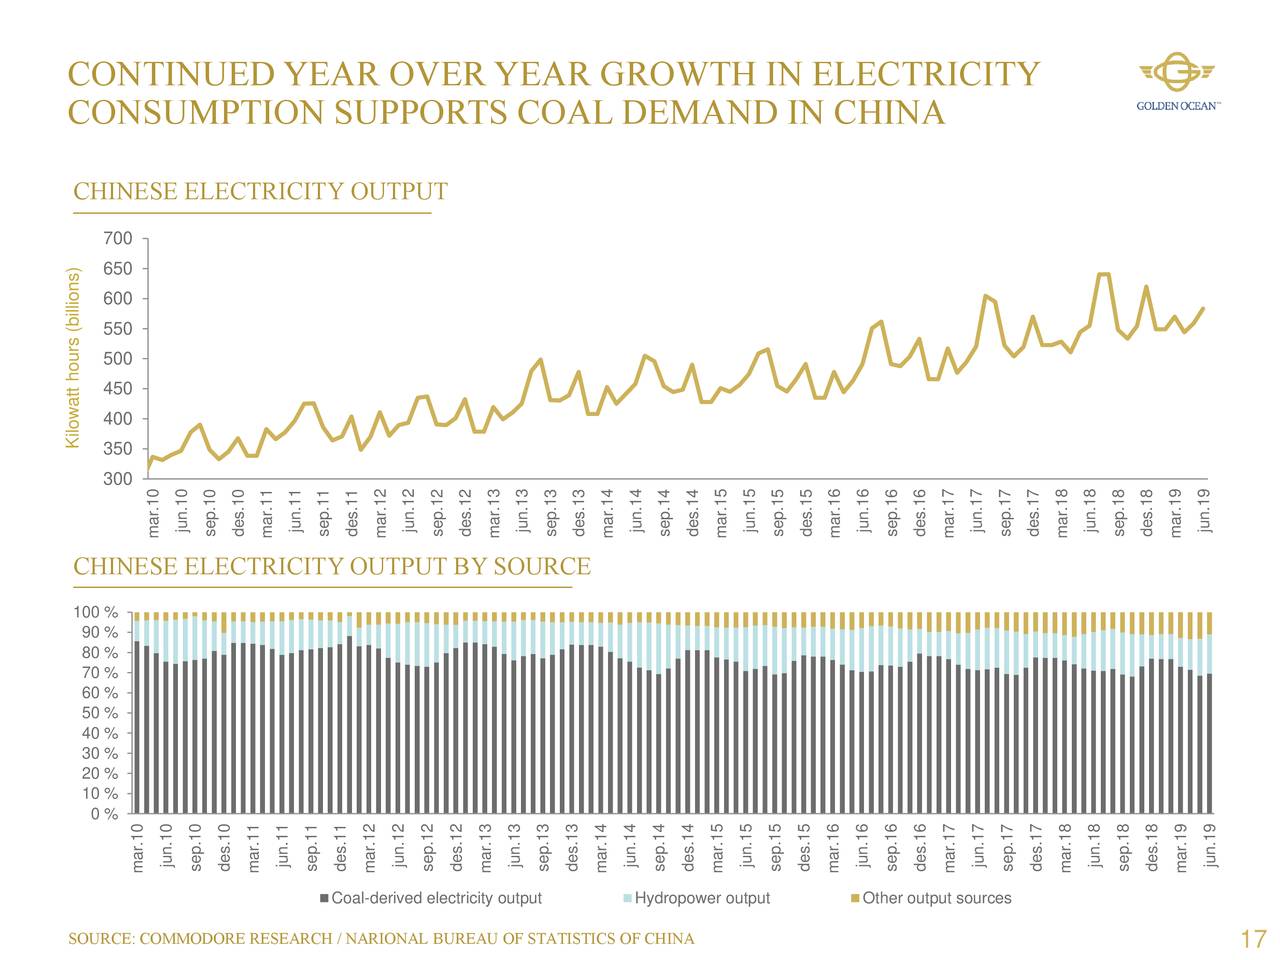 CONTINUED YEAR OVER YEAR GROWTH IN ELECTRICITY